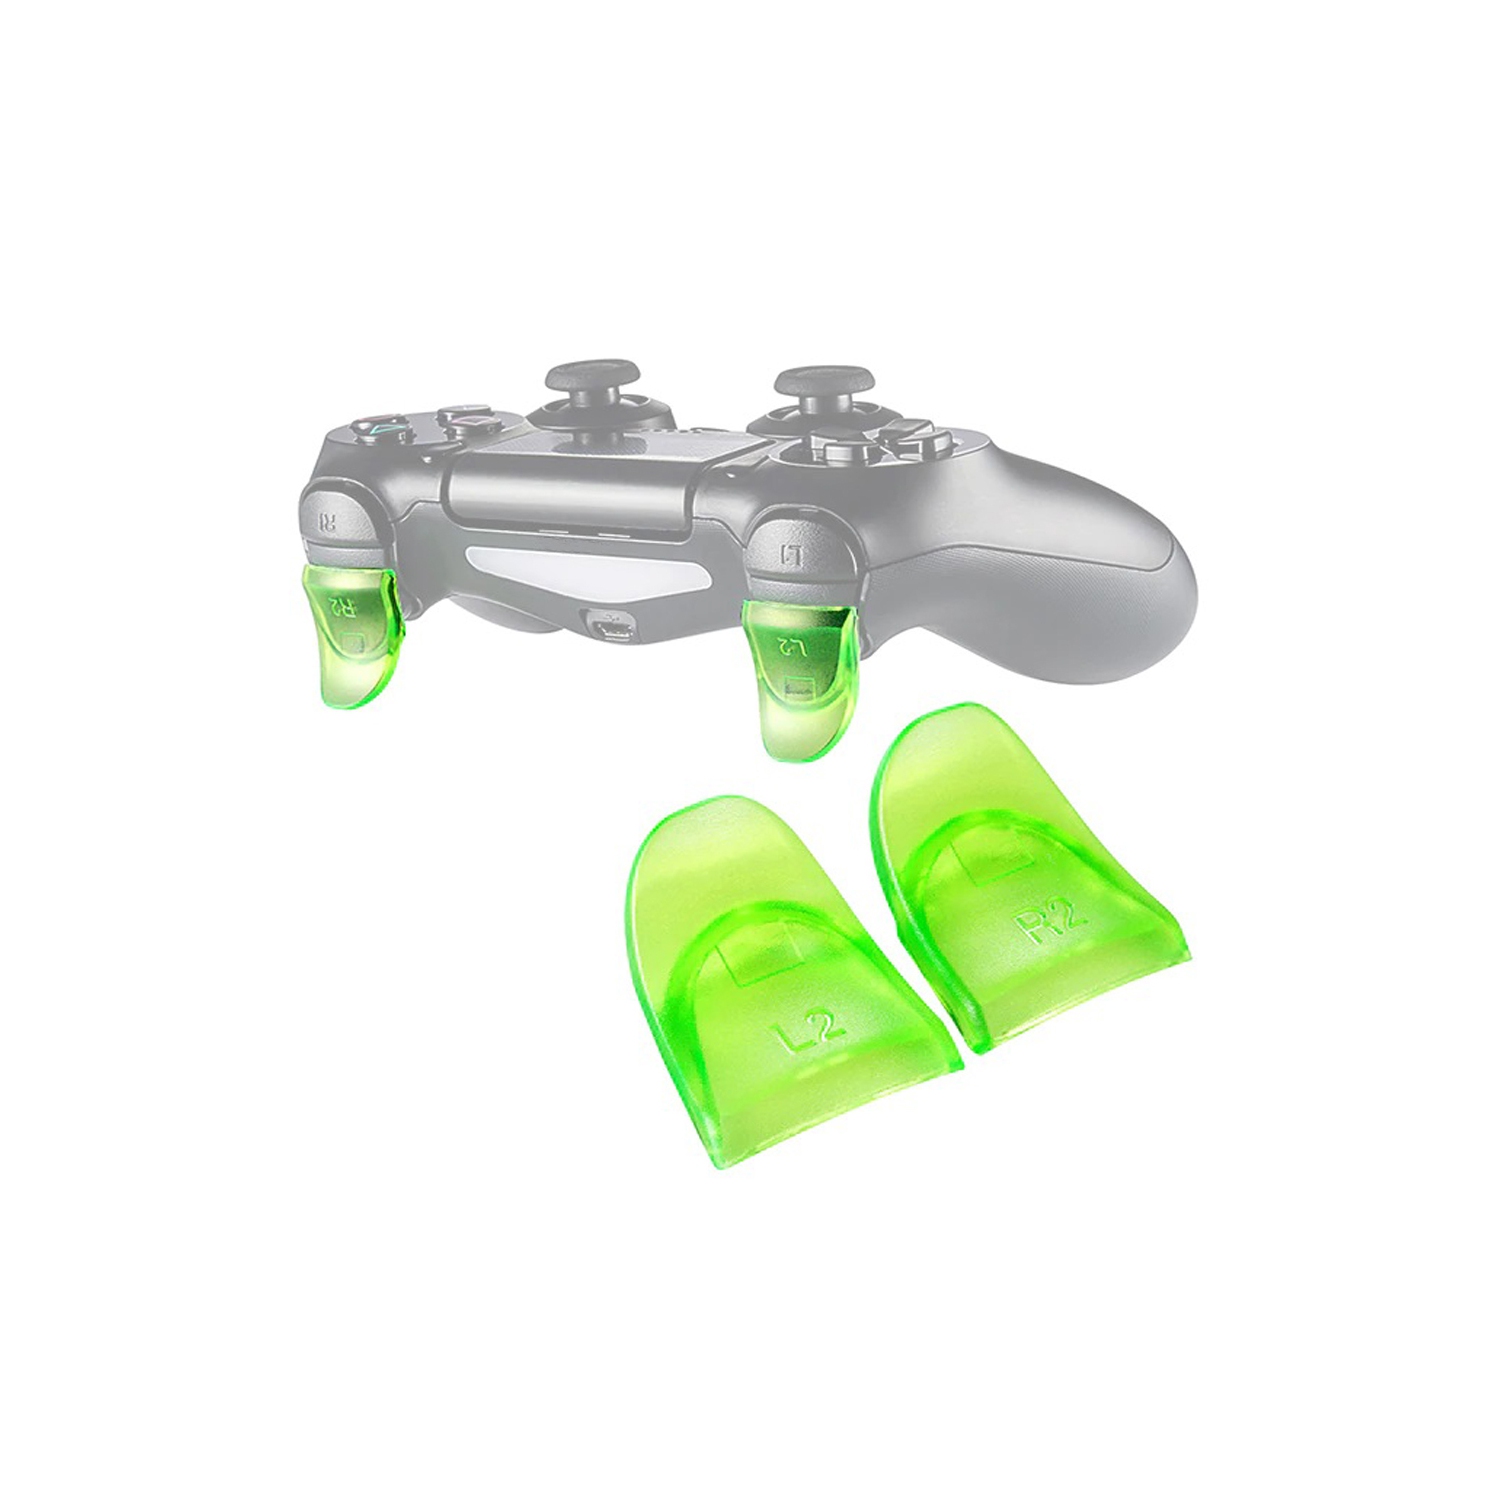 L2 R2 Buttons Extension Trigger 1 Pair For PlayStation 4 / PS4 Slim / PS4 Pro DualShock 4 DS4 V1 V2 Controllers - Green